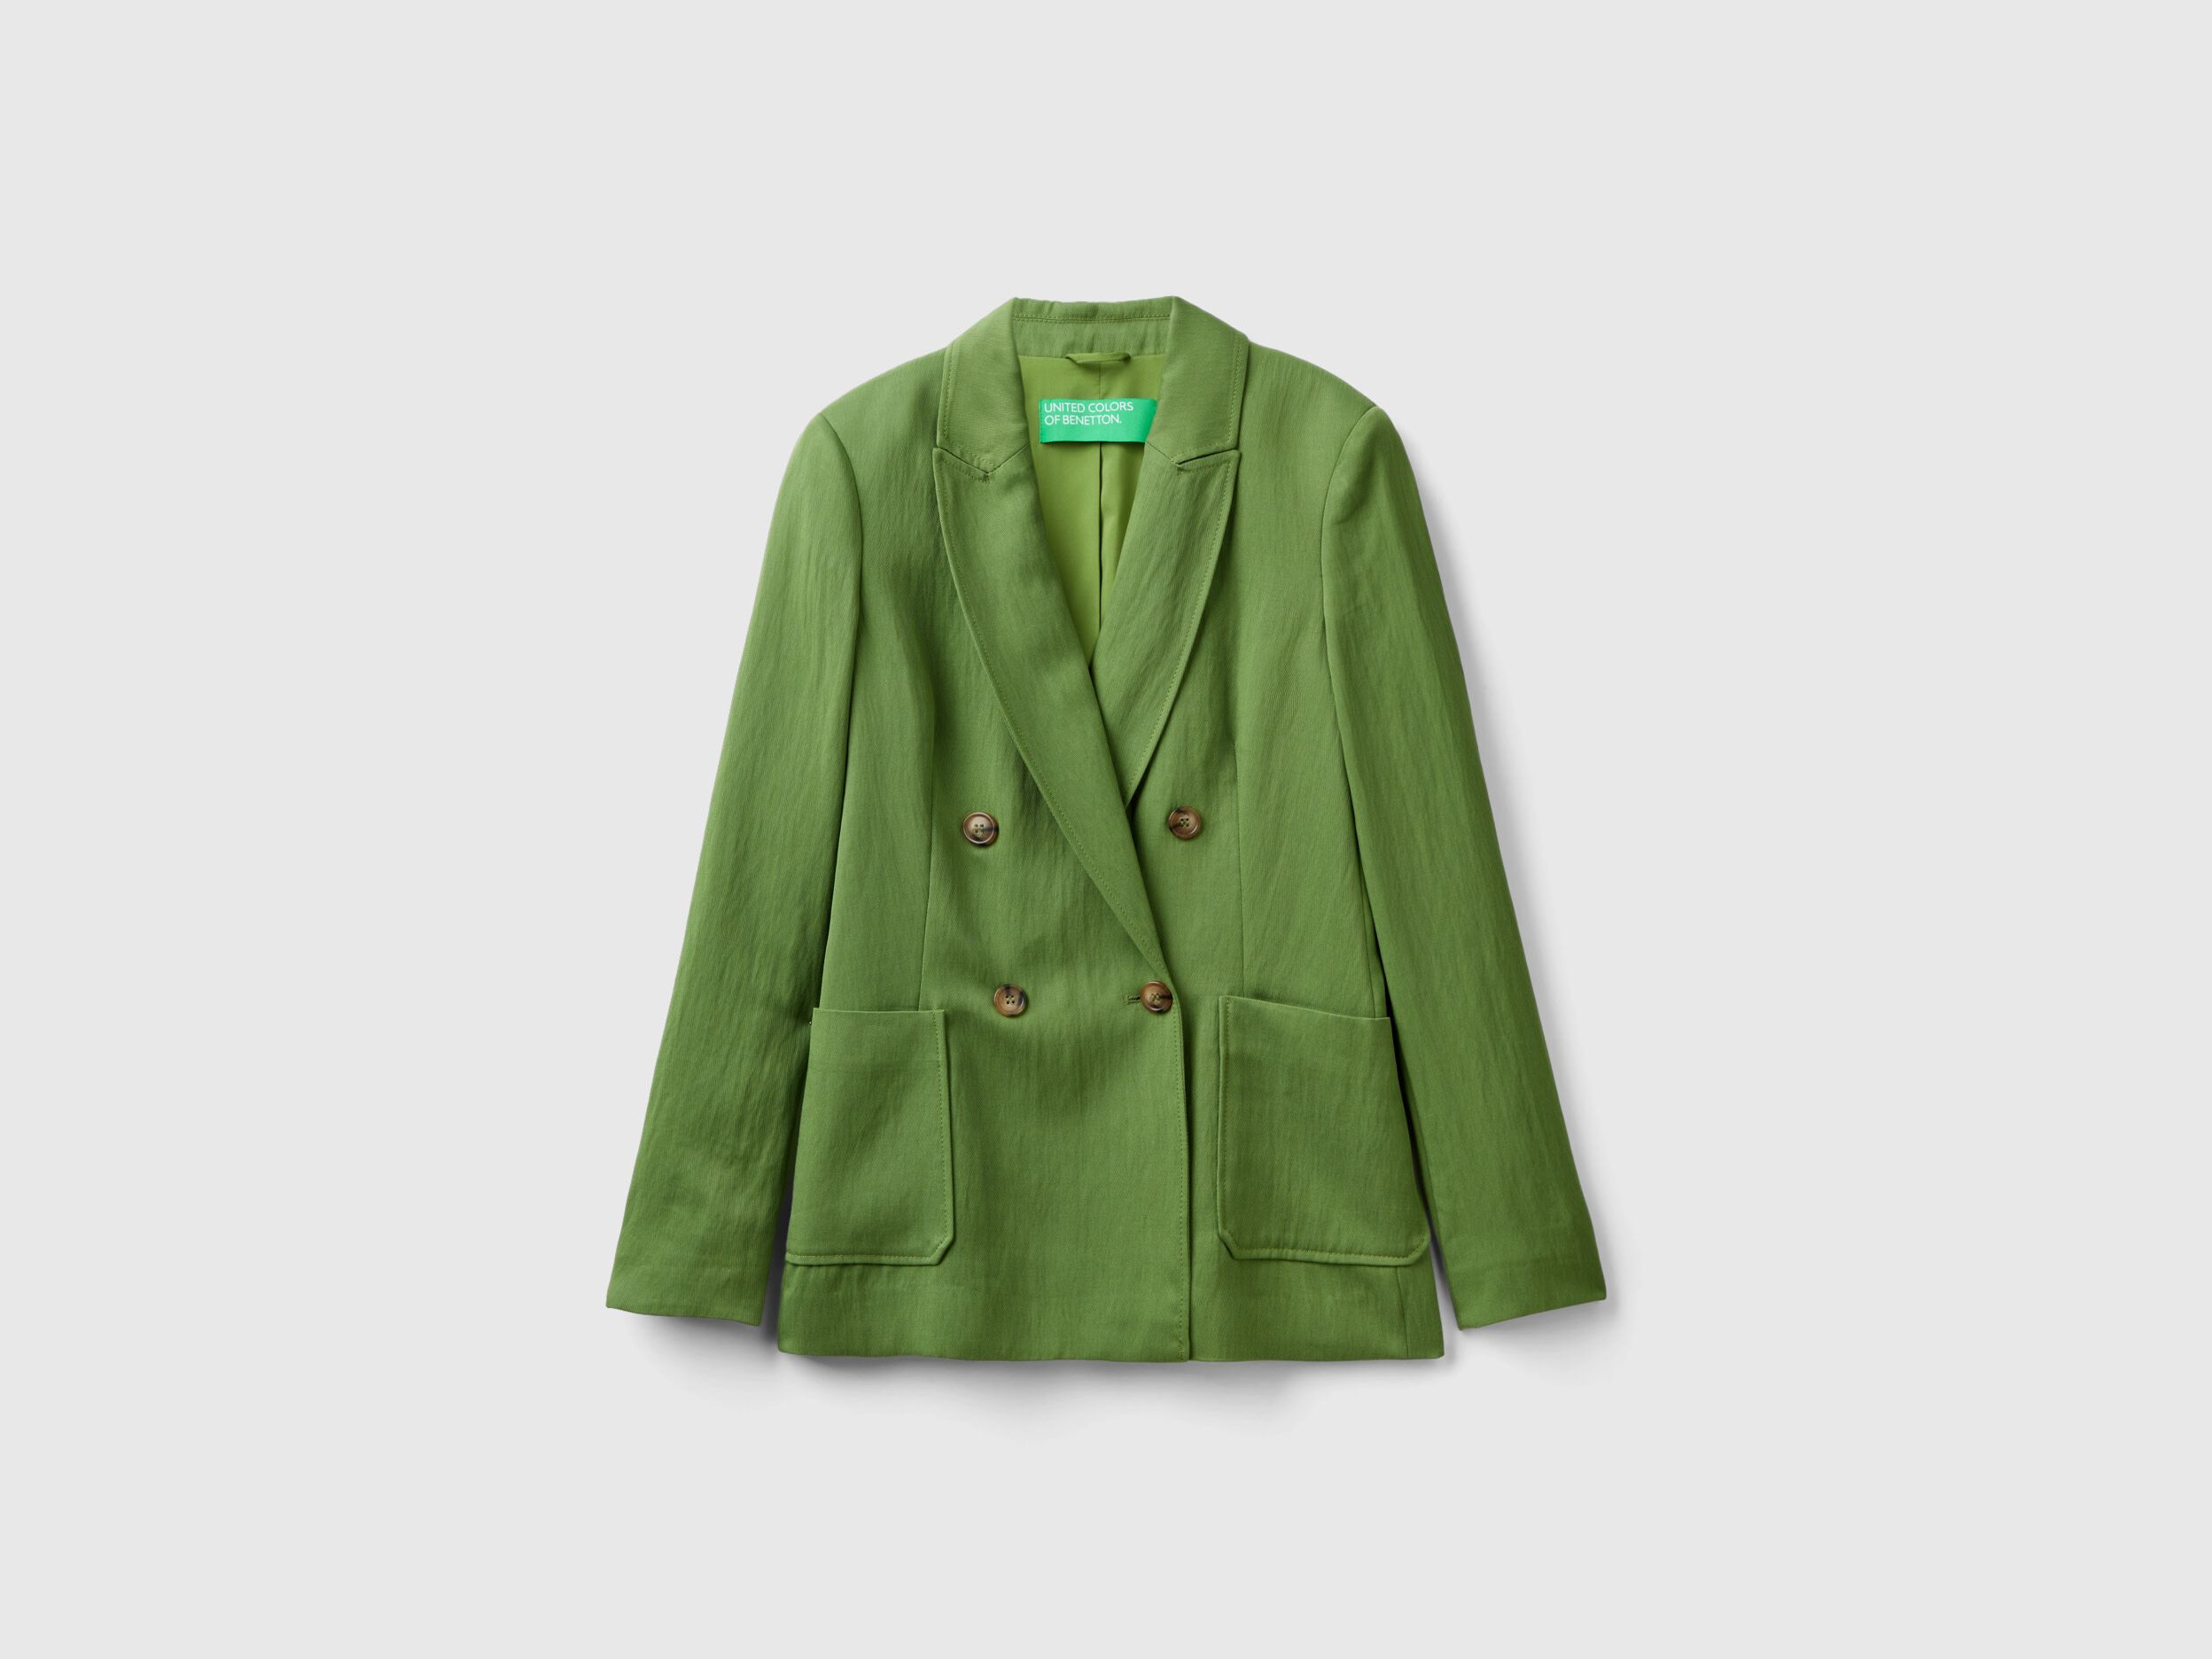 Double-breasted blazer in sustainable viscose blend